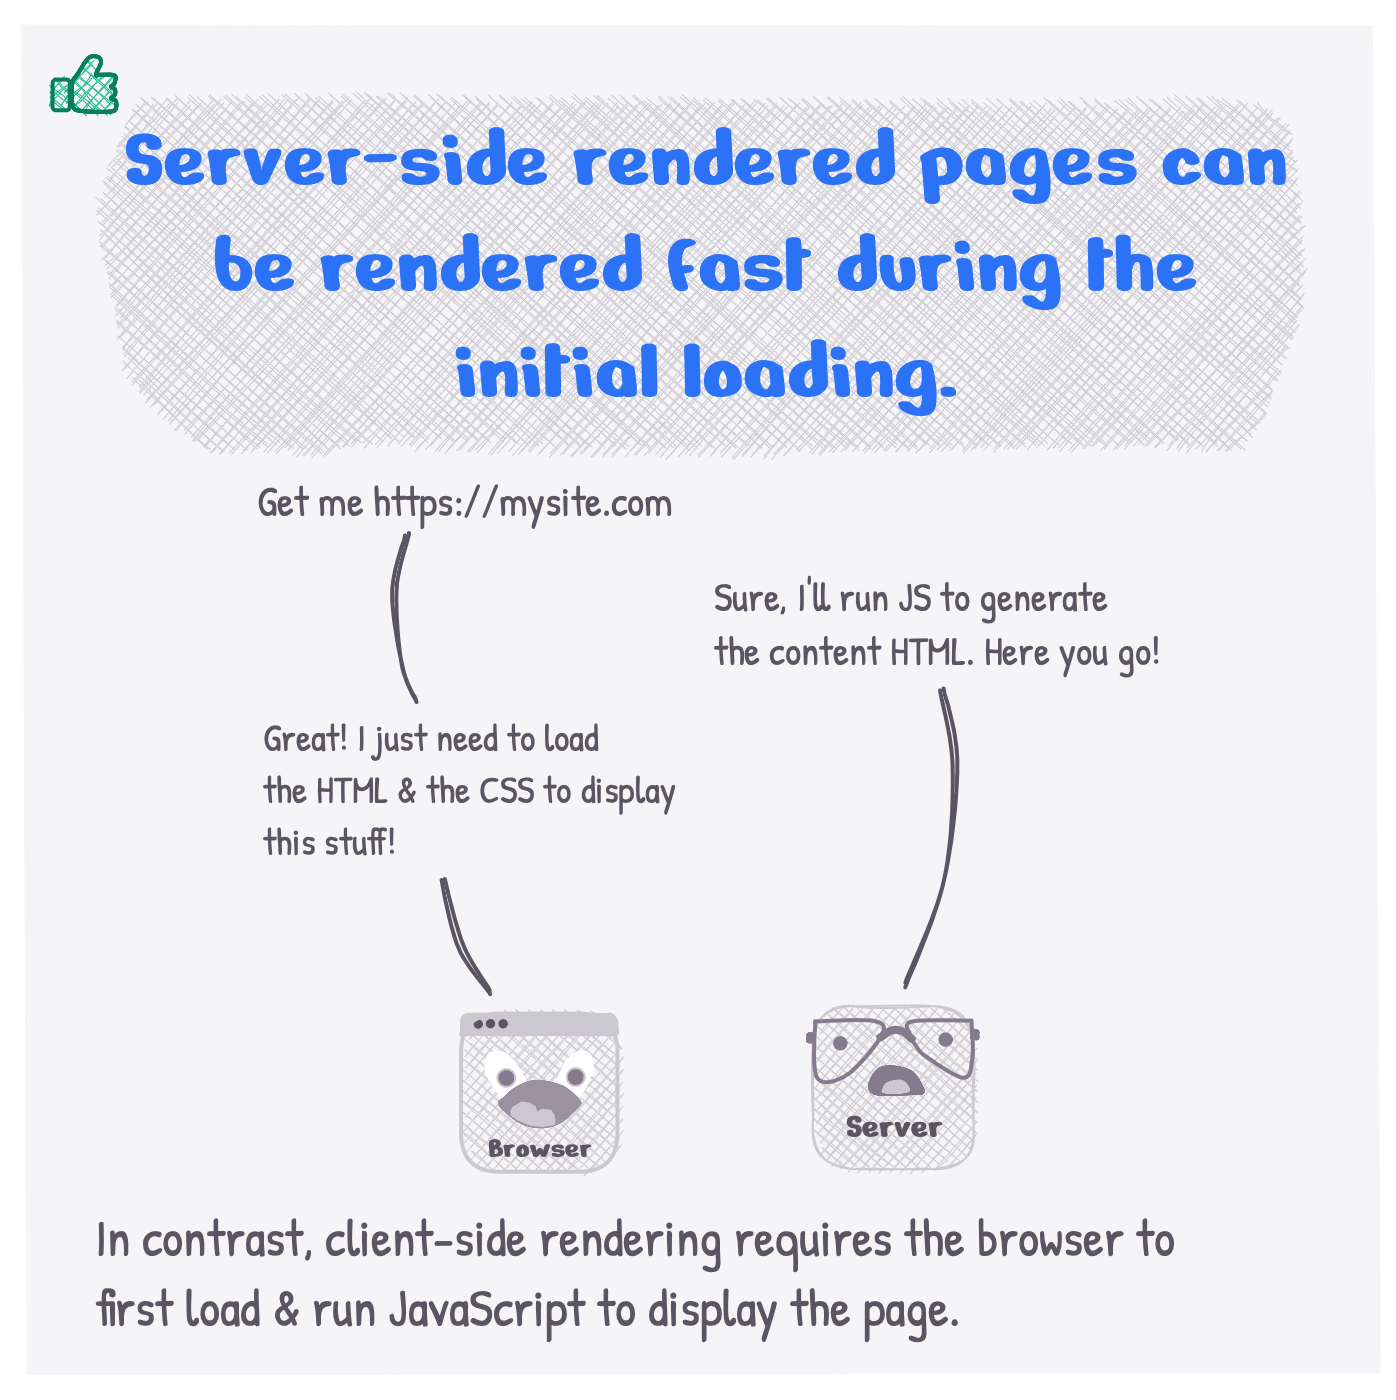 Server-side rendered pages can display fast during the initial loading